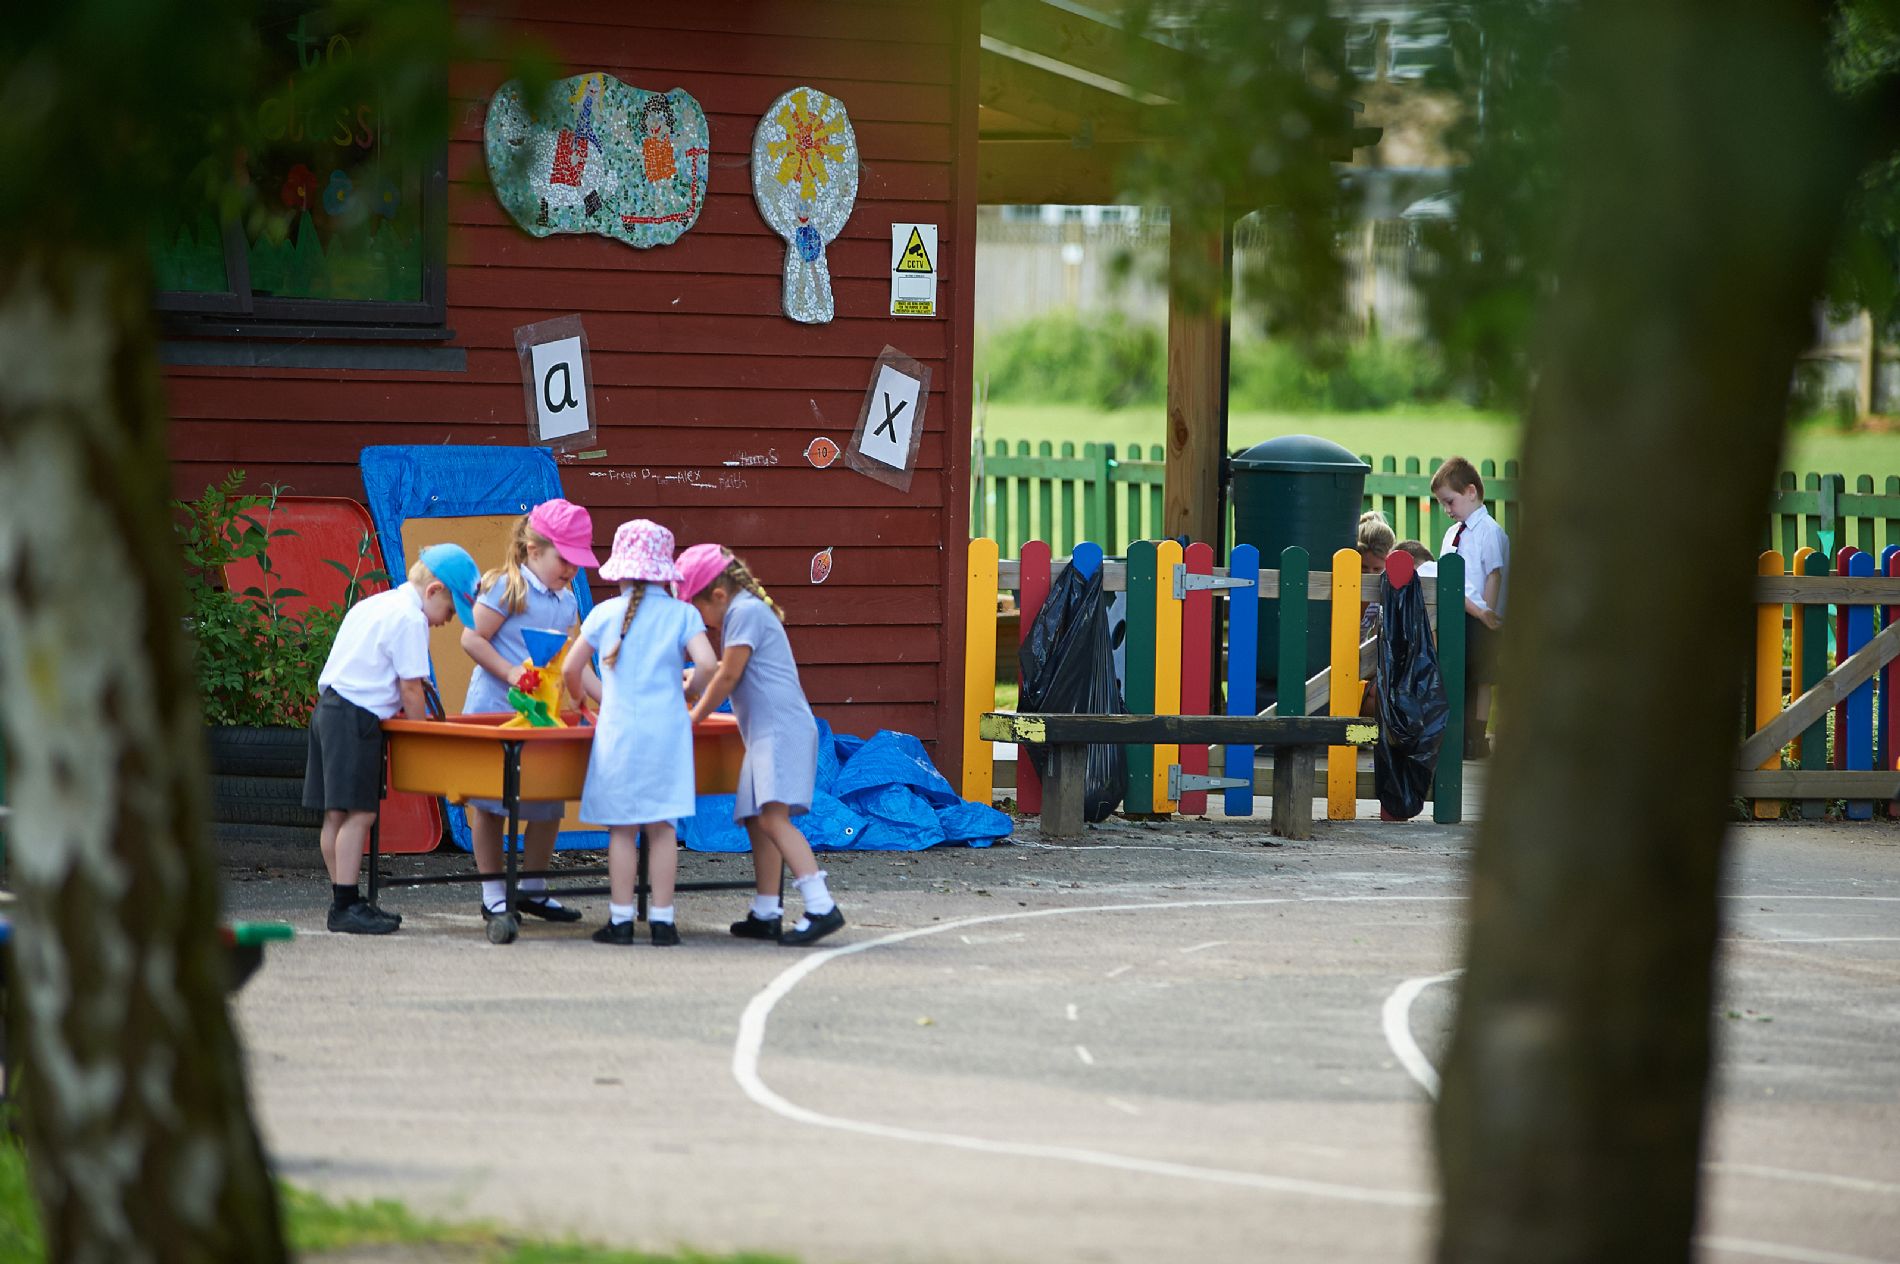 A small group of young pupils are pictured playing together outdoors with a sandpit.